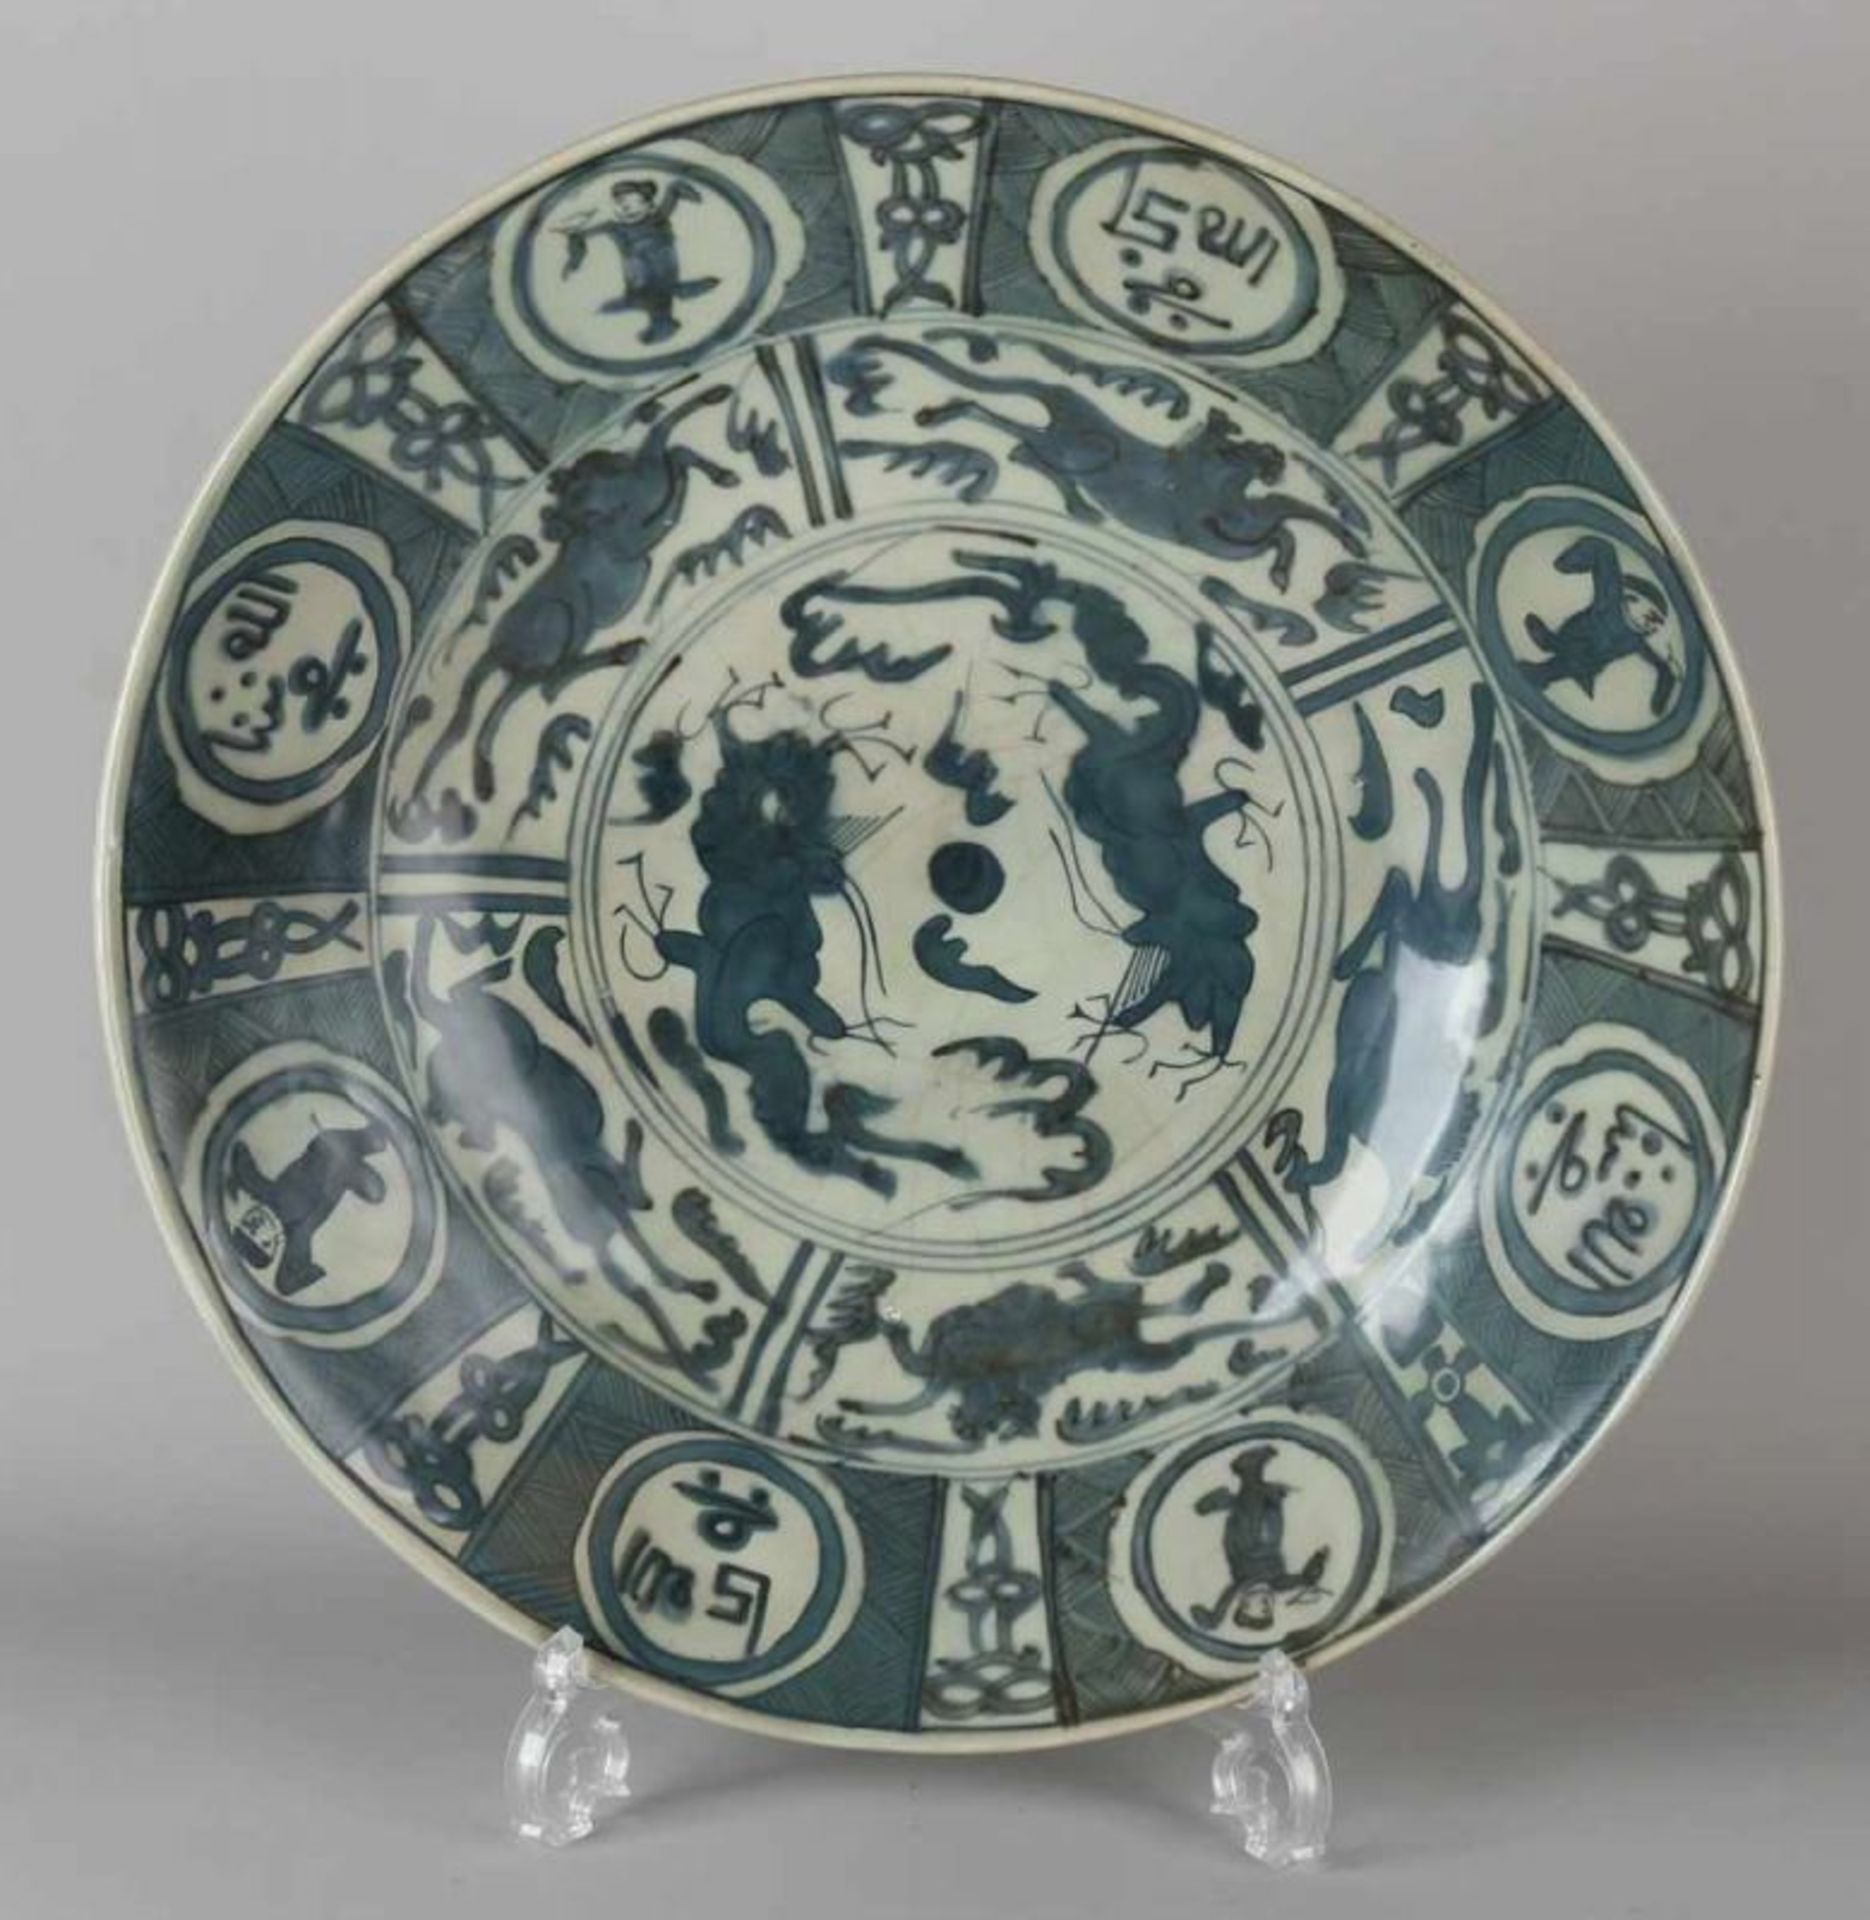 Rare antique 15th century Chinese porcelain Ming dish. Professionally restored by Koerts